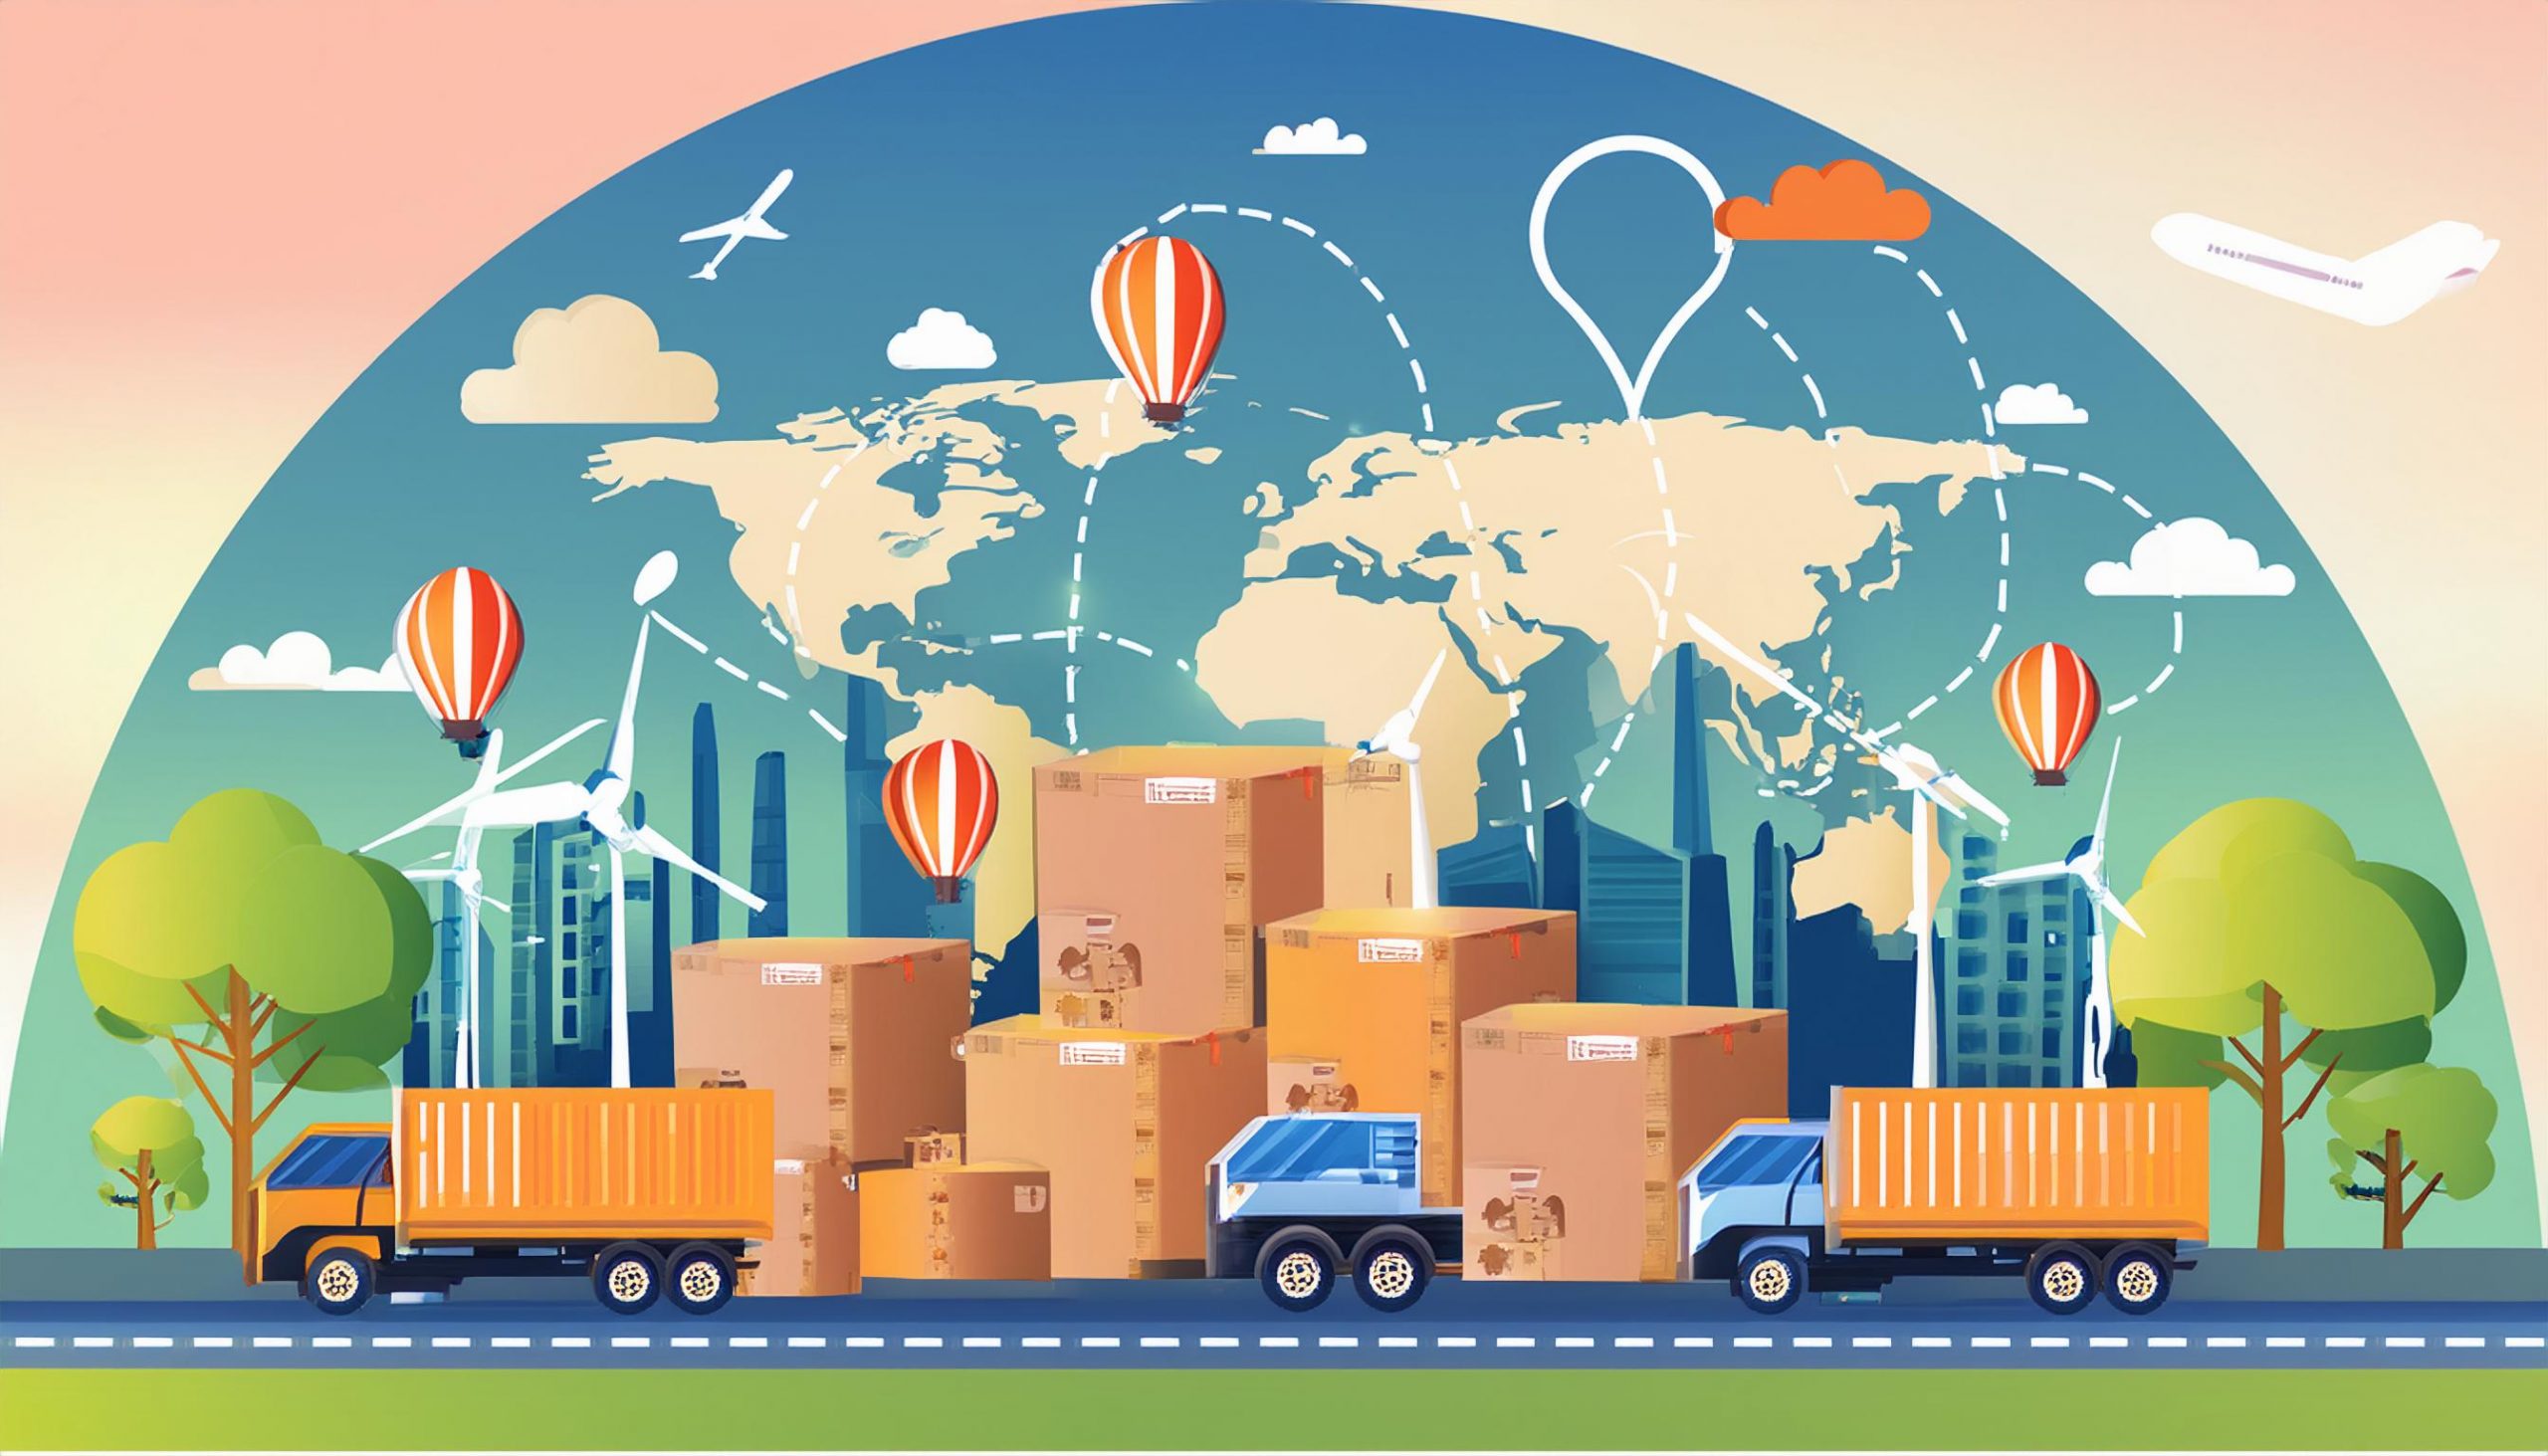 Illustration depicting parcel consolidation with multiple packages combined into one shipment, reducing transportation emissions and costs.